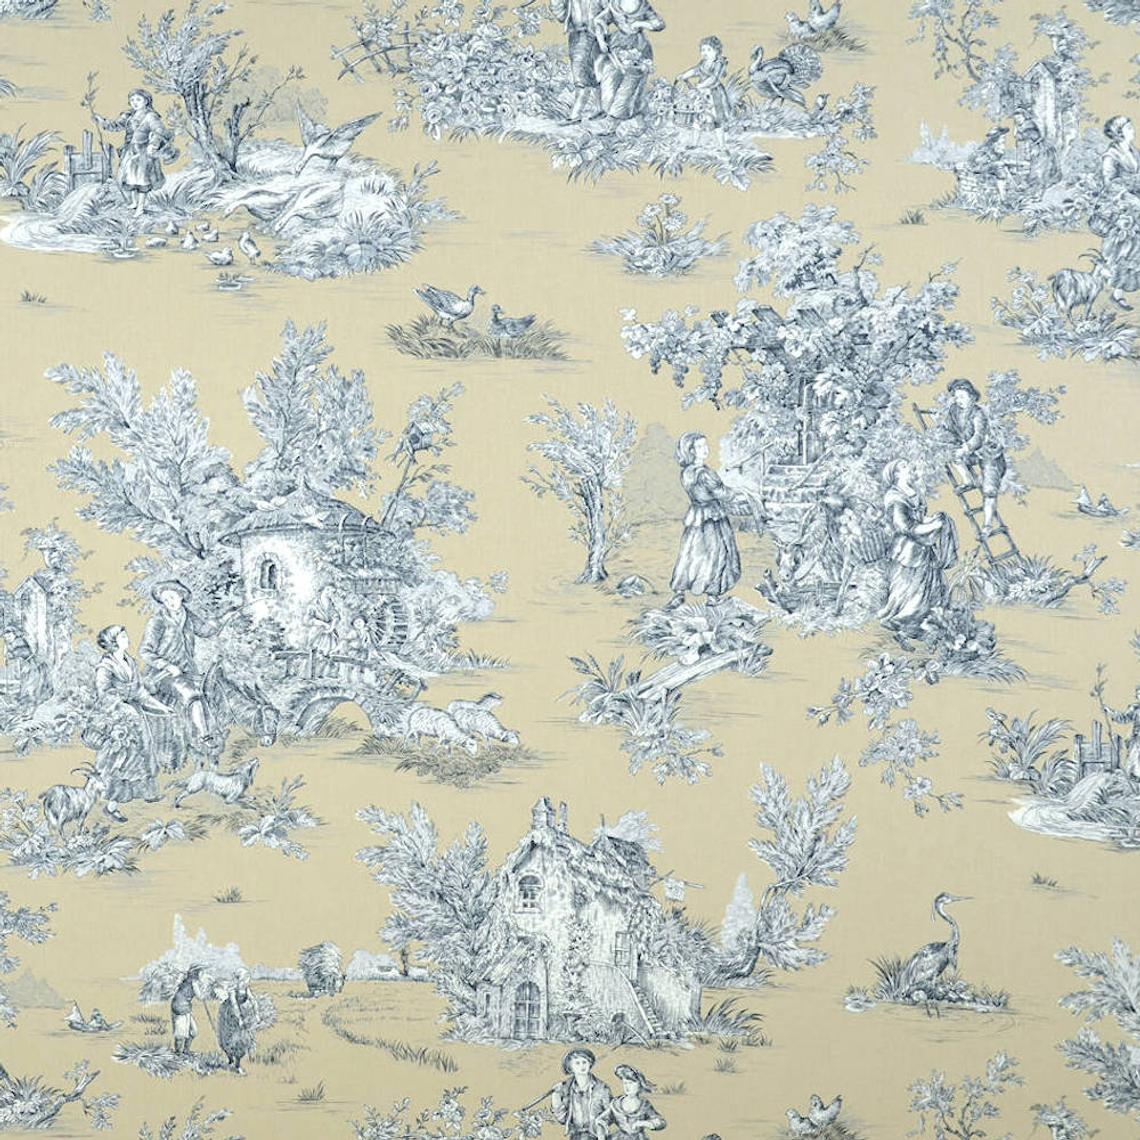 tailored bedskirt in pastorale #88 blue on beige french country toile